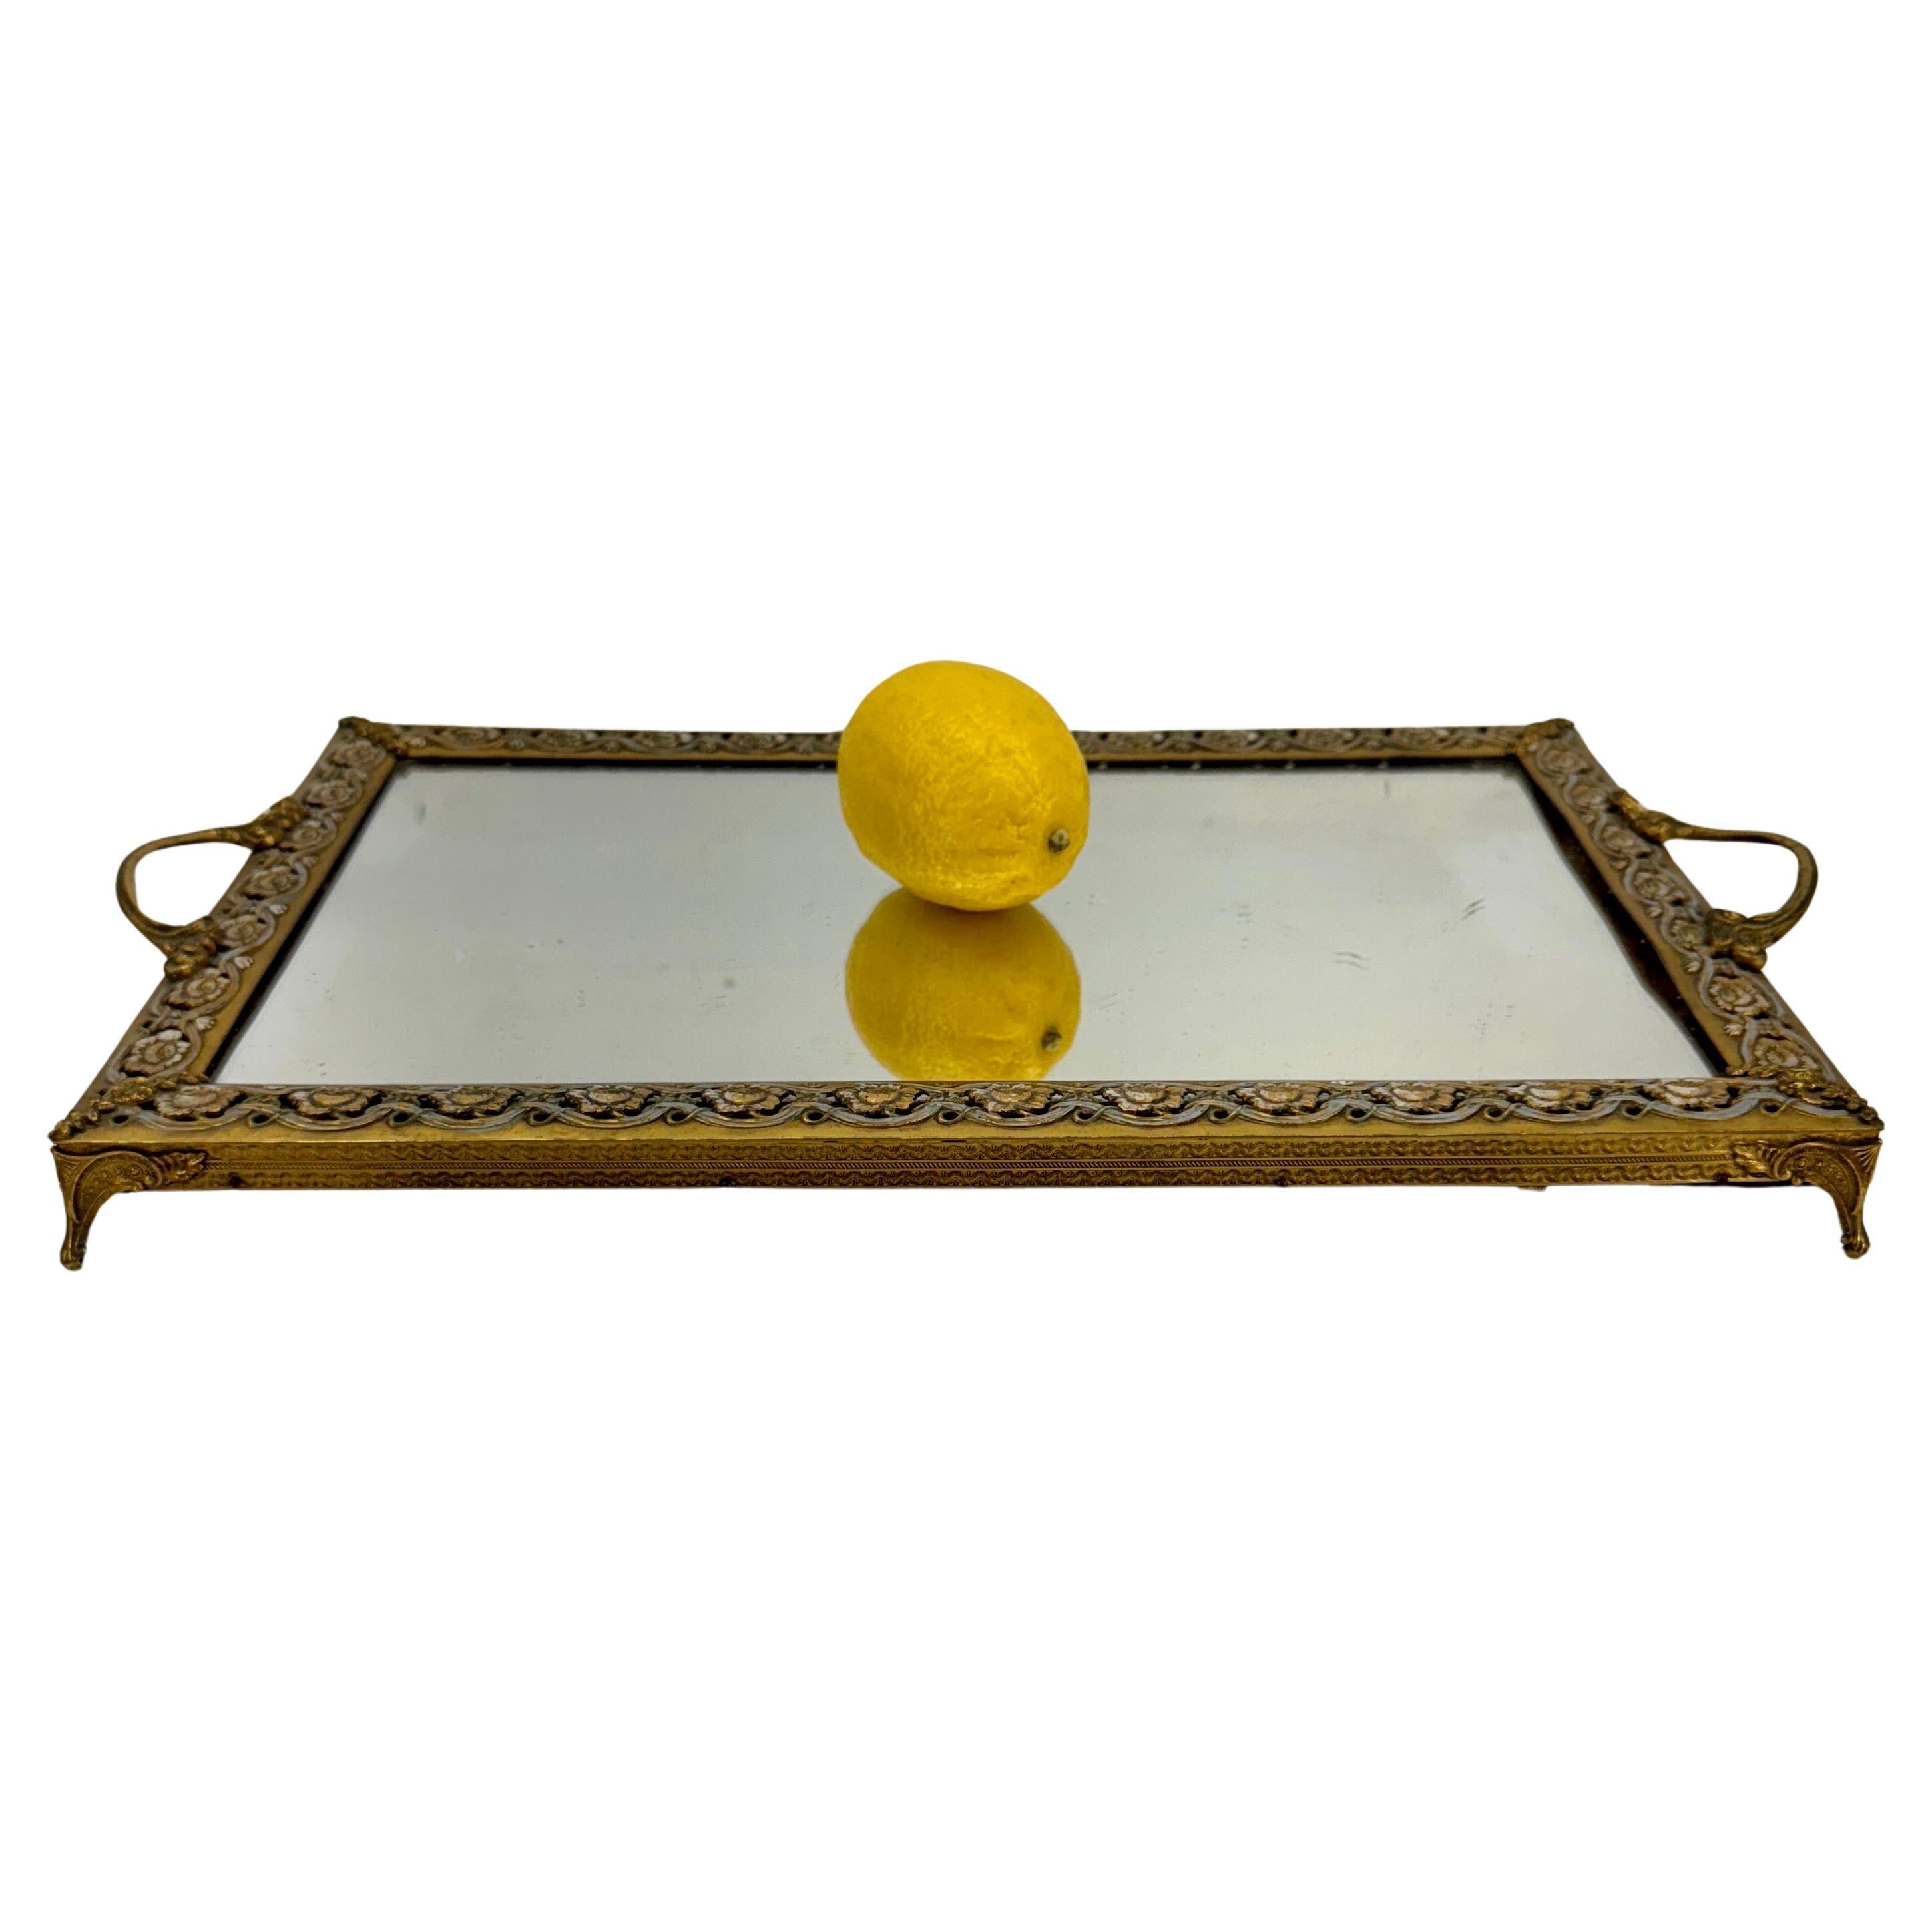 French Mirrored Brass Jewelry Tray, Late 19th Century

Charming French tray featuring an elaborate floral motif.. The attention to detail is apparent on this piece. The mirrored glass rests on the sturdy base. This tray with aged patina is perfect